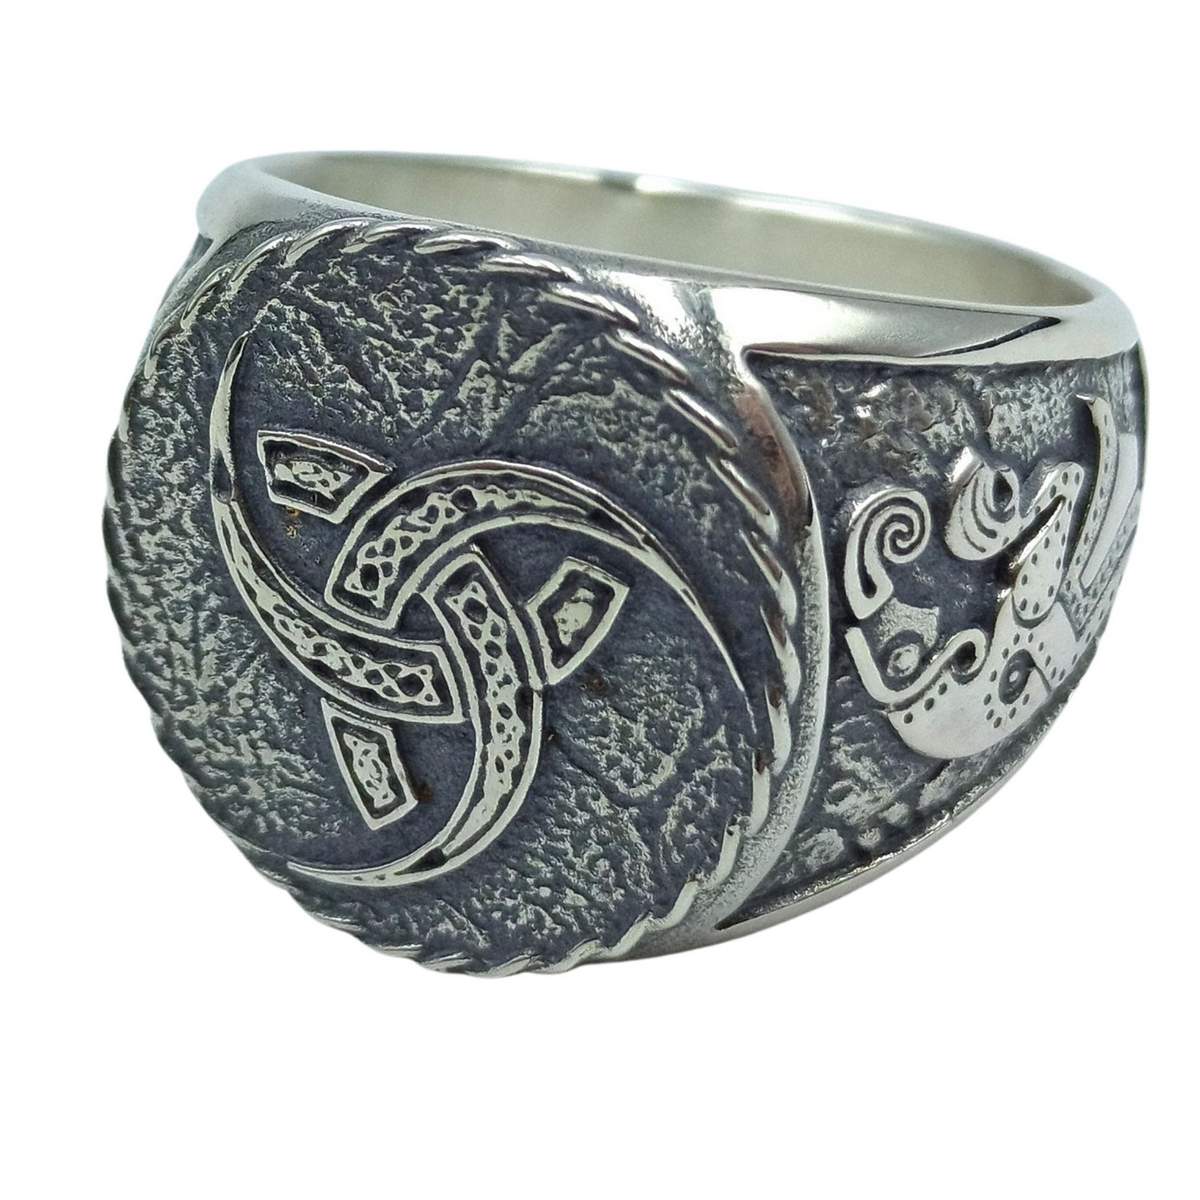 Triple horn of Odin silver signet ring 6 US/CA  